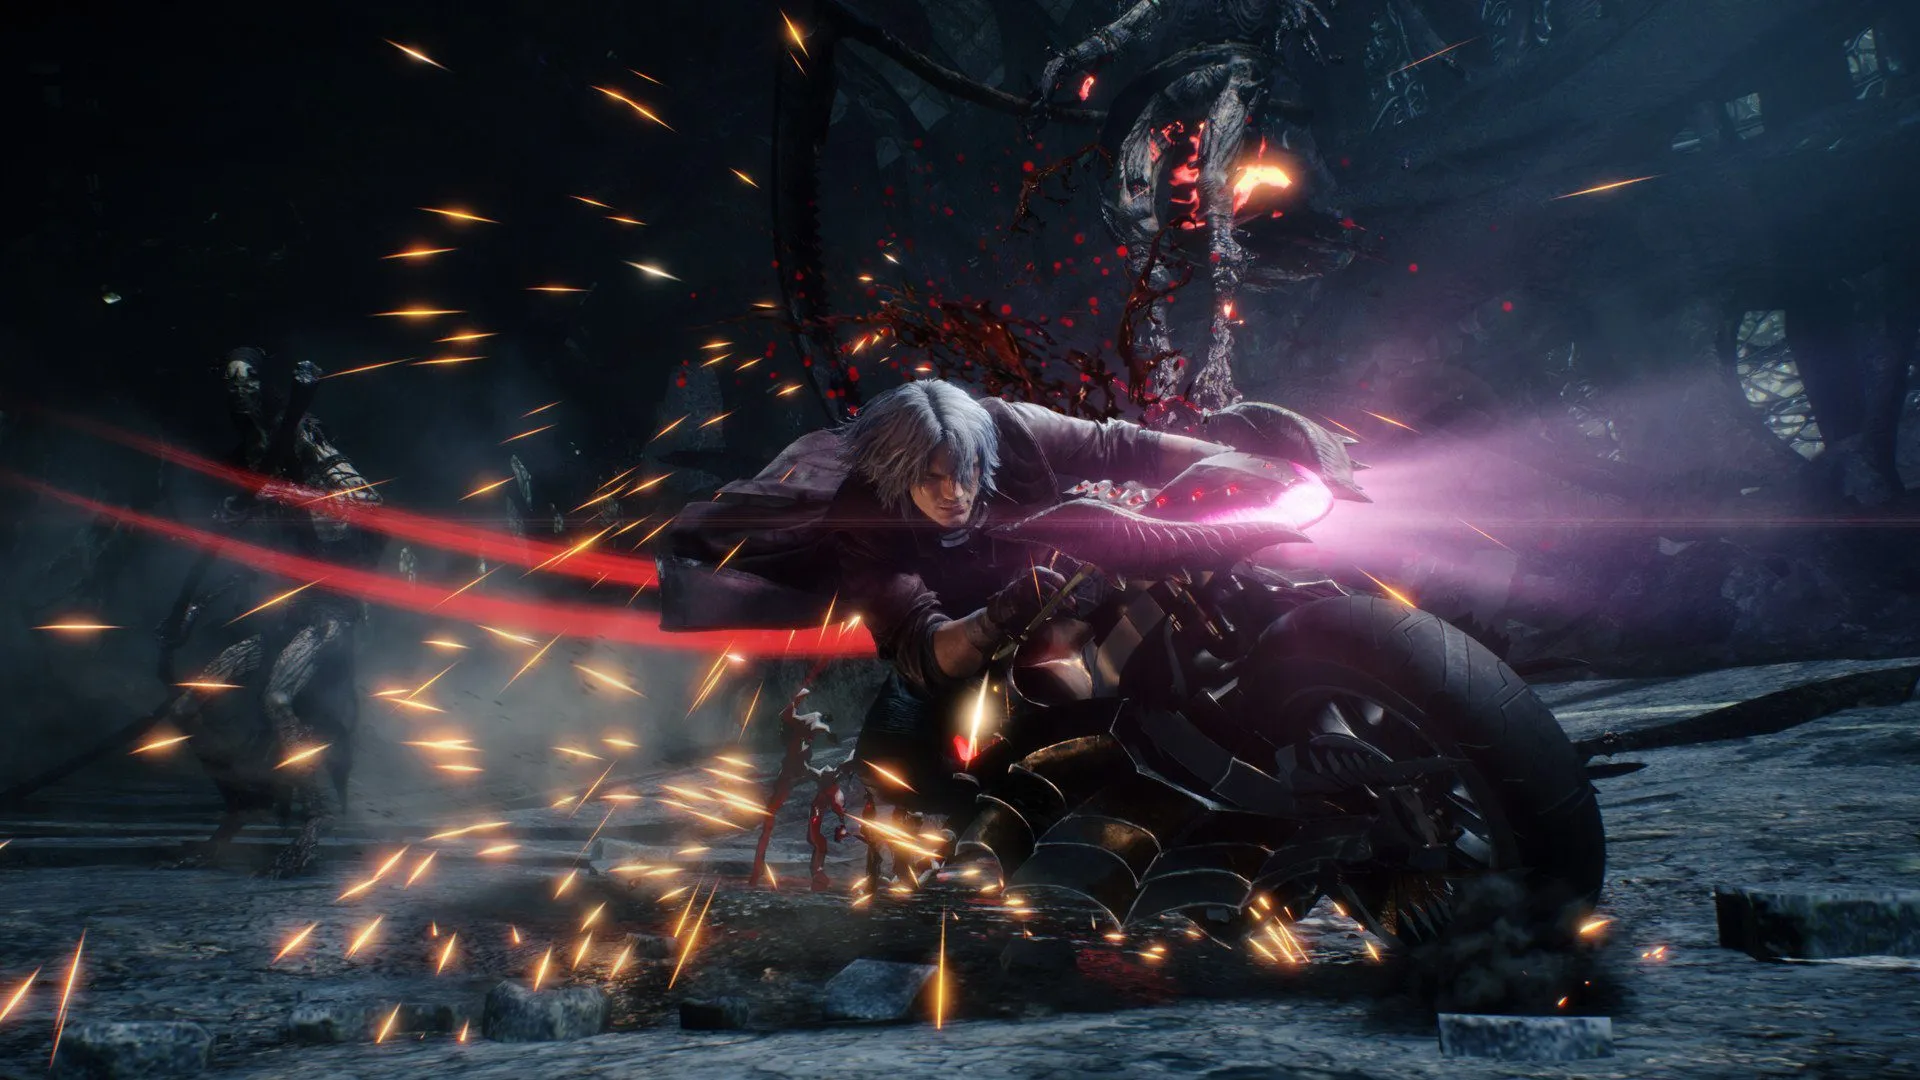  Devil May Cry 5 Special Edition (PS5) : Video Games